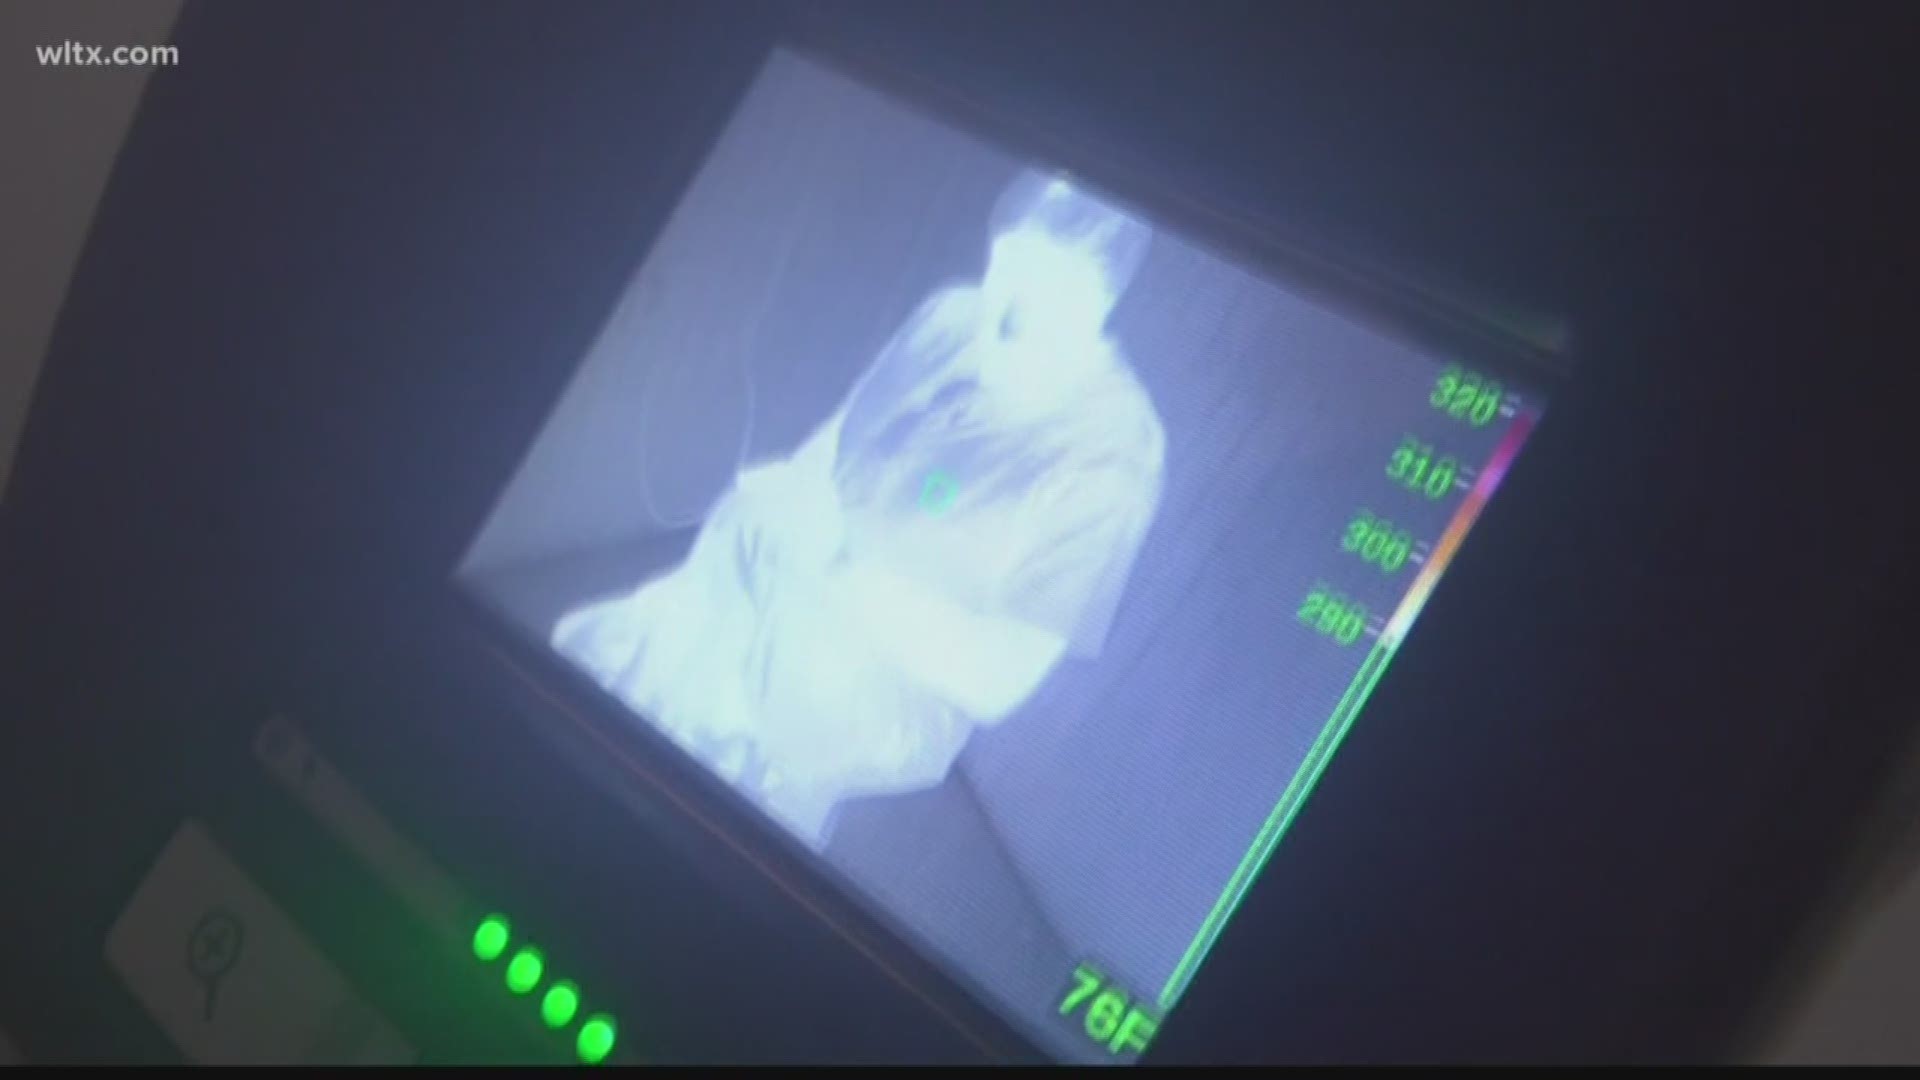 House of Raeford's FLOCK found out the department needed a new thermal imaging camera.
It helps firefighters find people through smoke in fires.